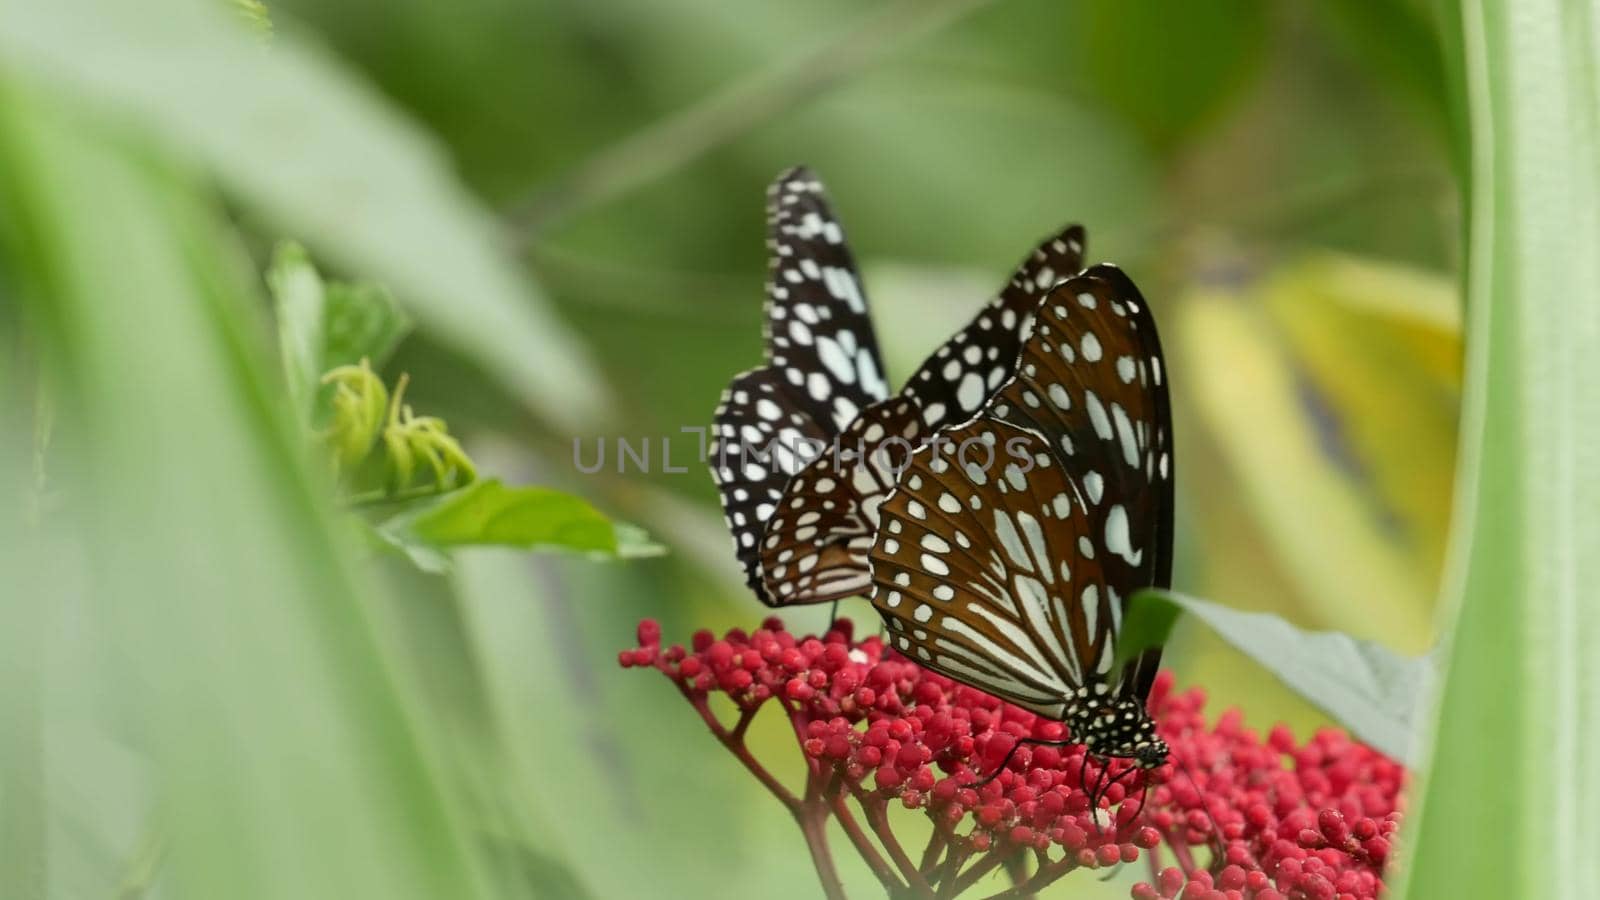 Tropical exotic butterfly in jungle rainforest sitting on green leaves, macro close up. Spring paradise, lush foliage natural background, defocused greenery in the woods. Fresh sunny romantic garden by DogoraSun